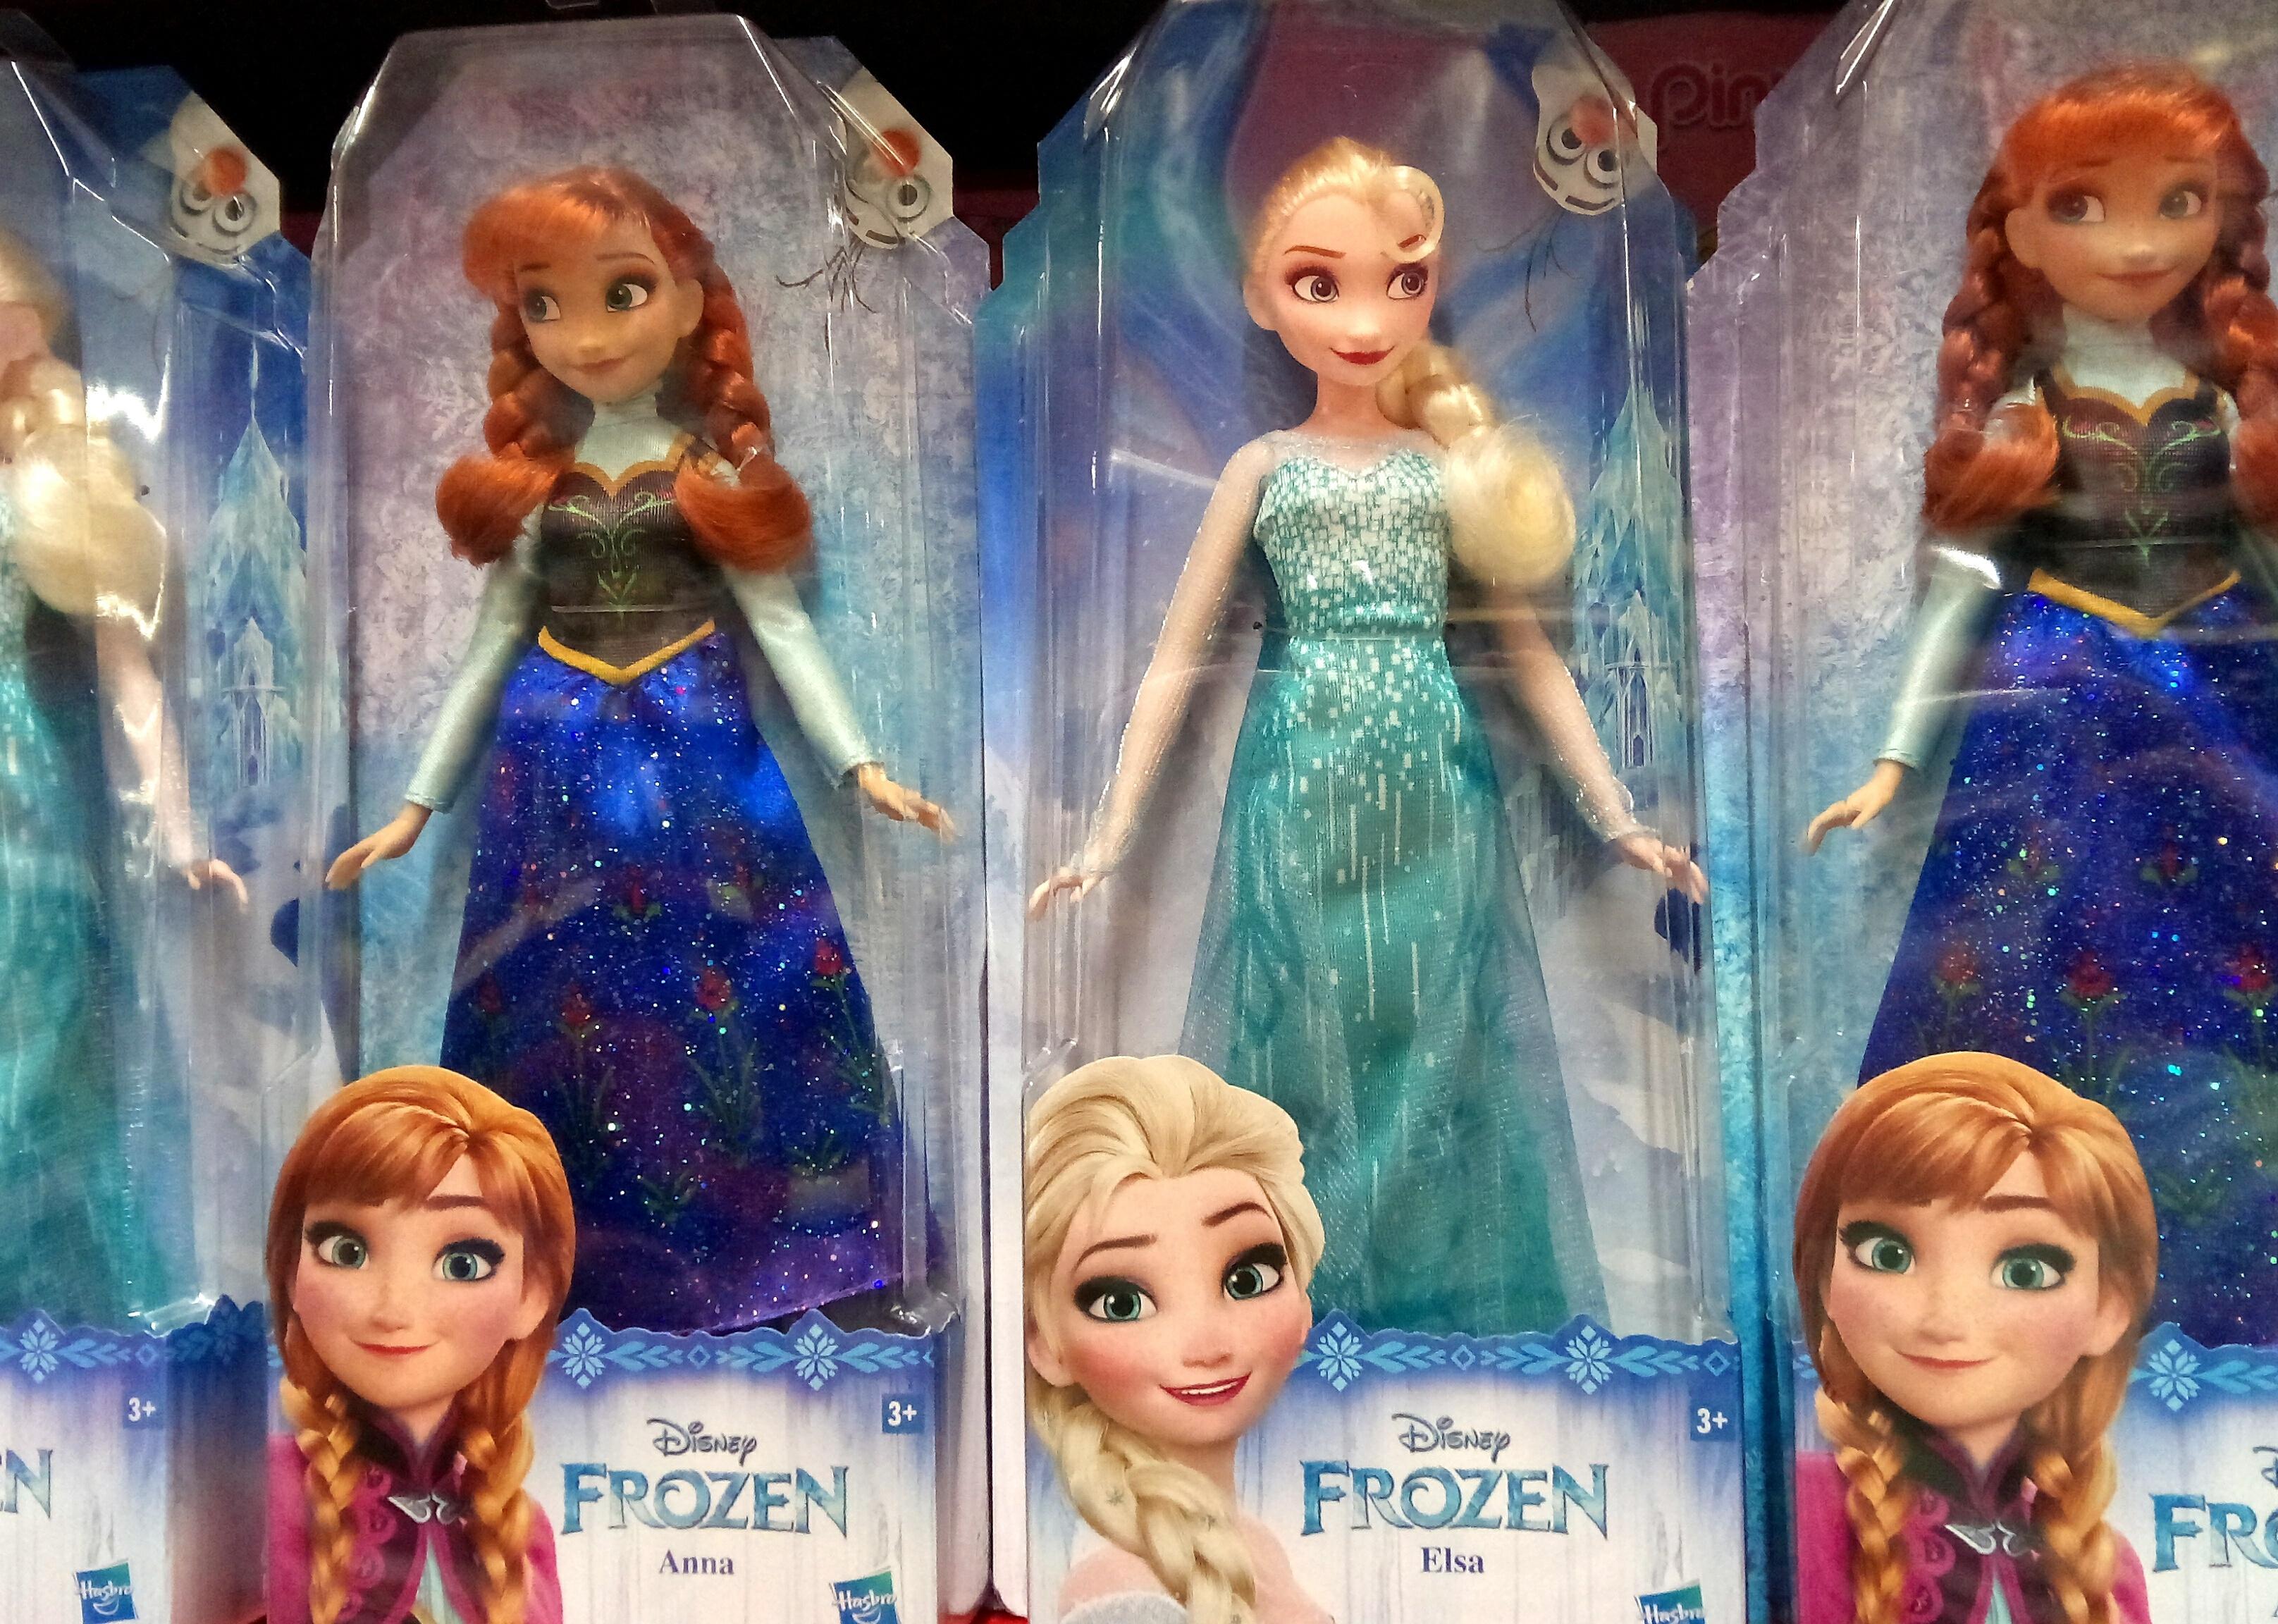 Selection of Disney 'Frozen' Elsa and Anna dolls on display.